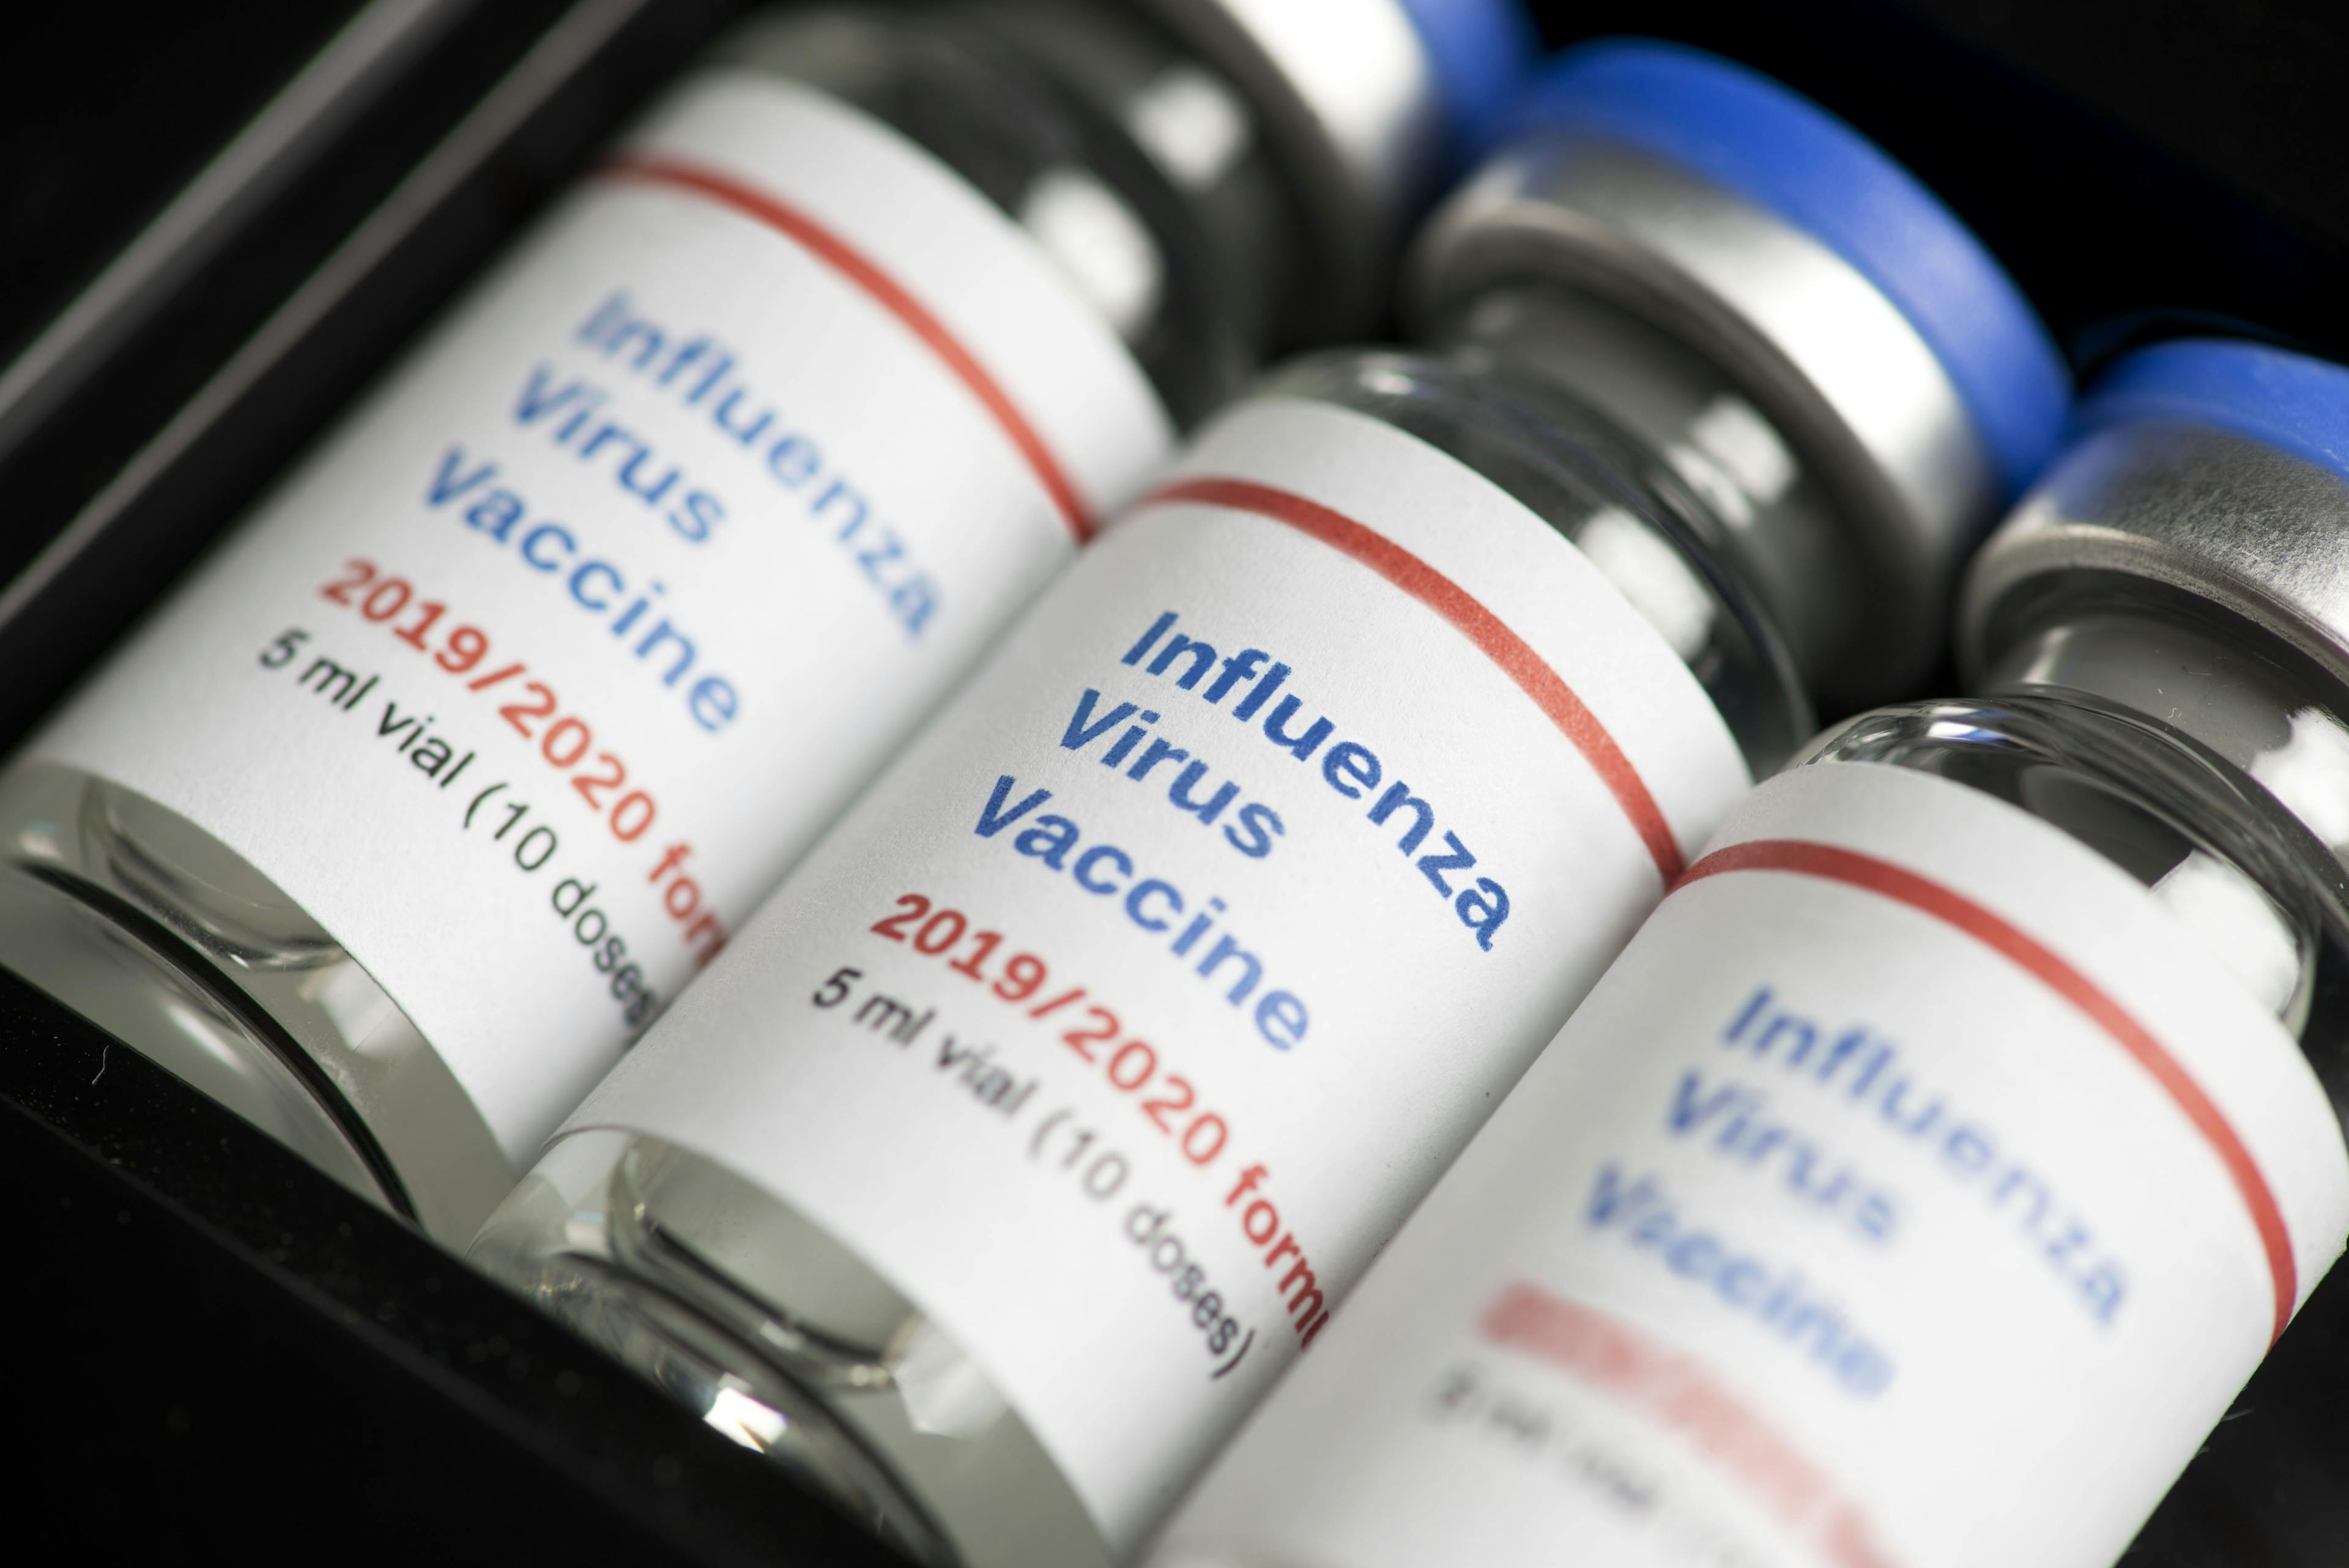 Study: Flu Vaccine Rates Are Lowest for Individuals Without Regular Health Care Providers